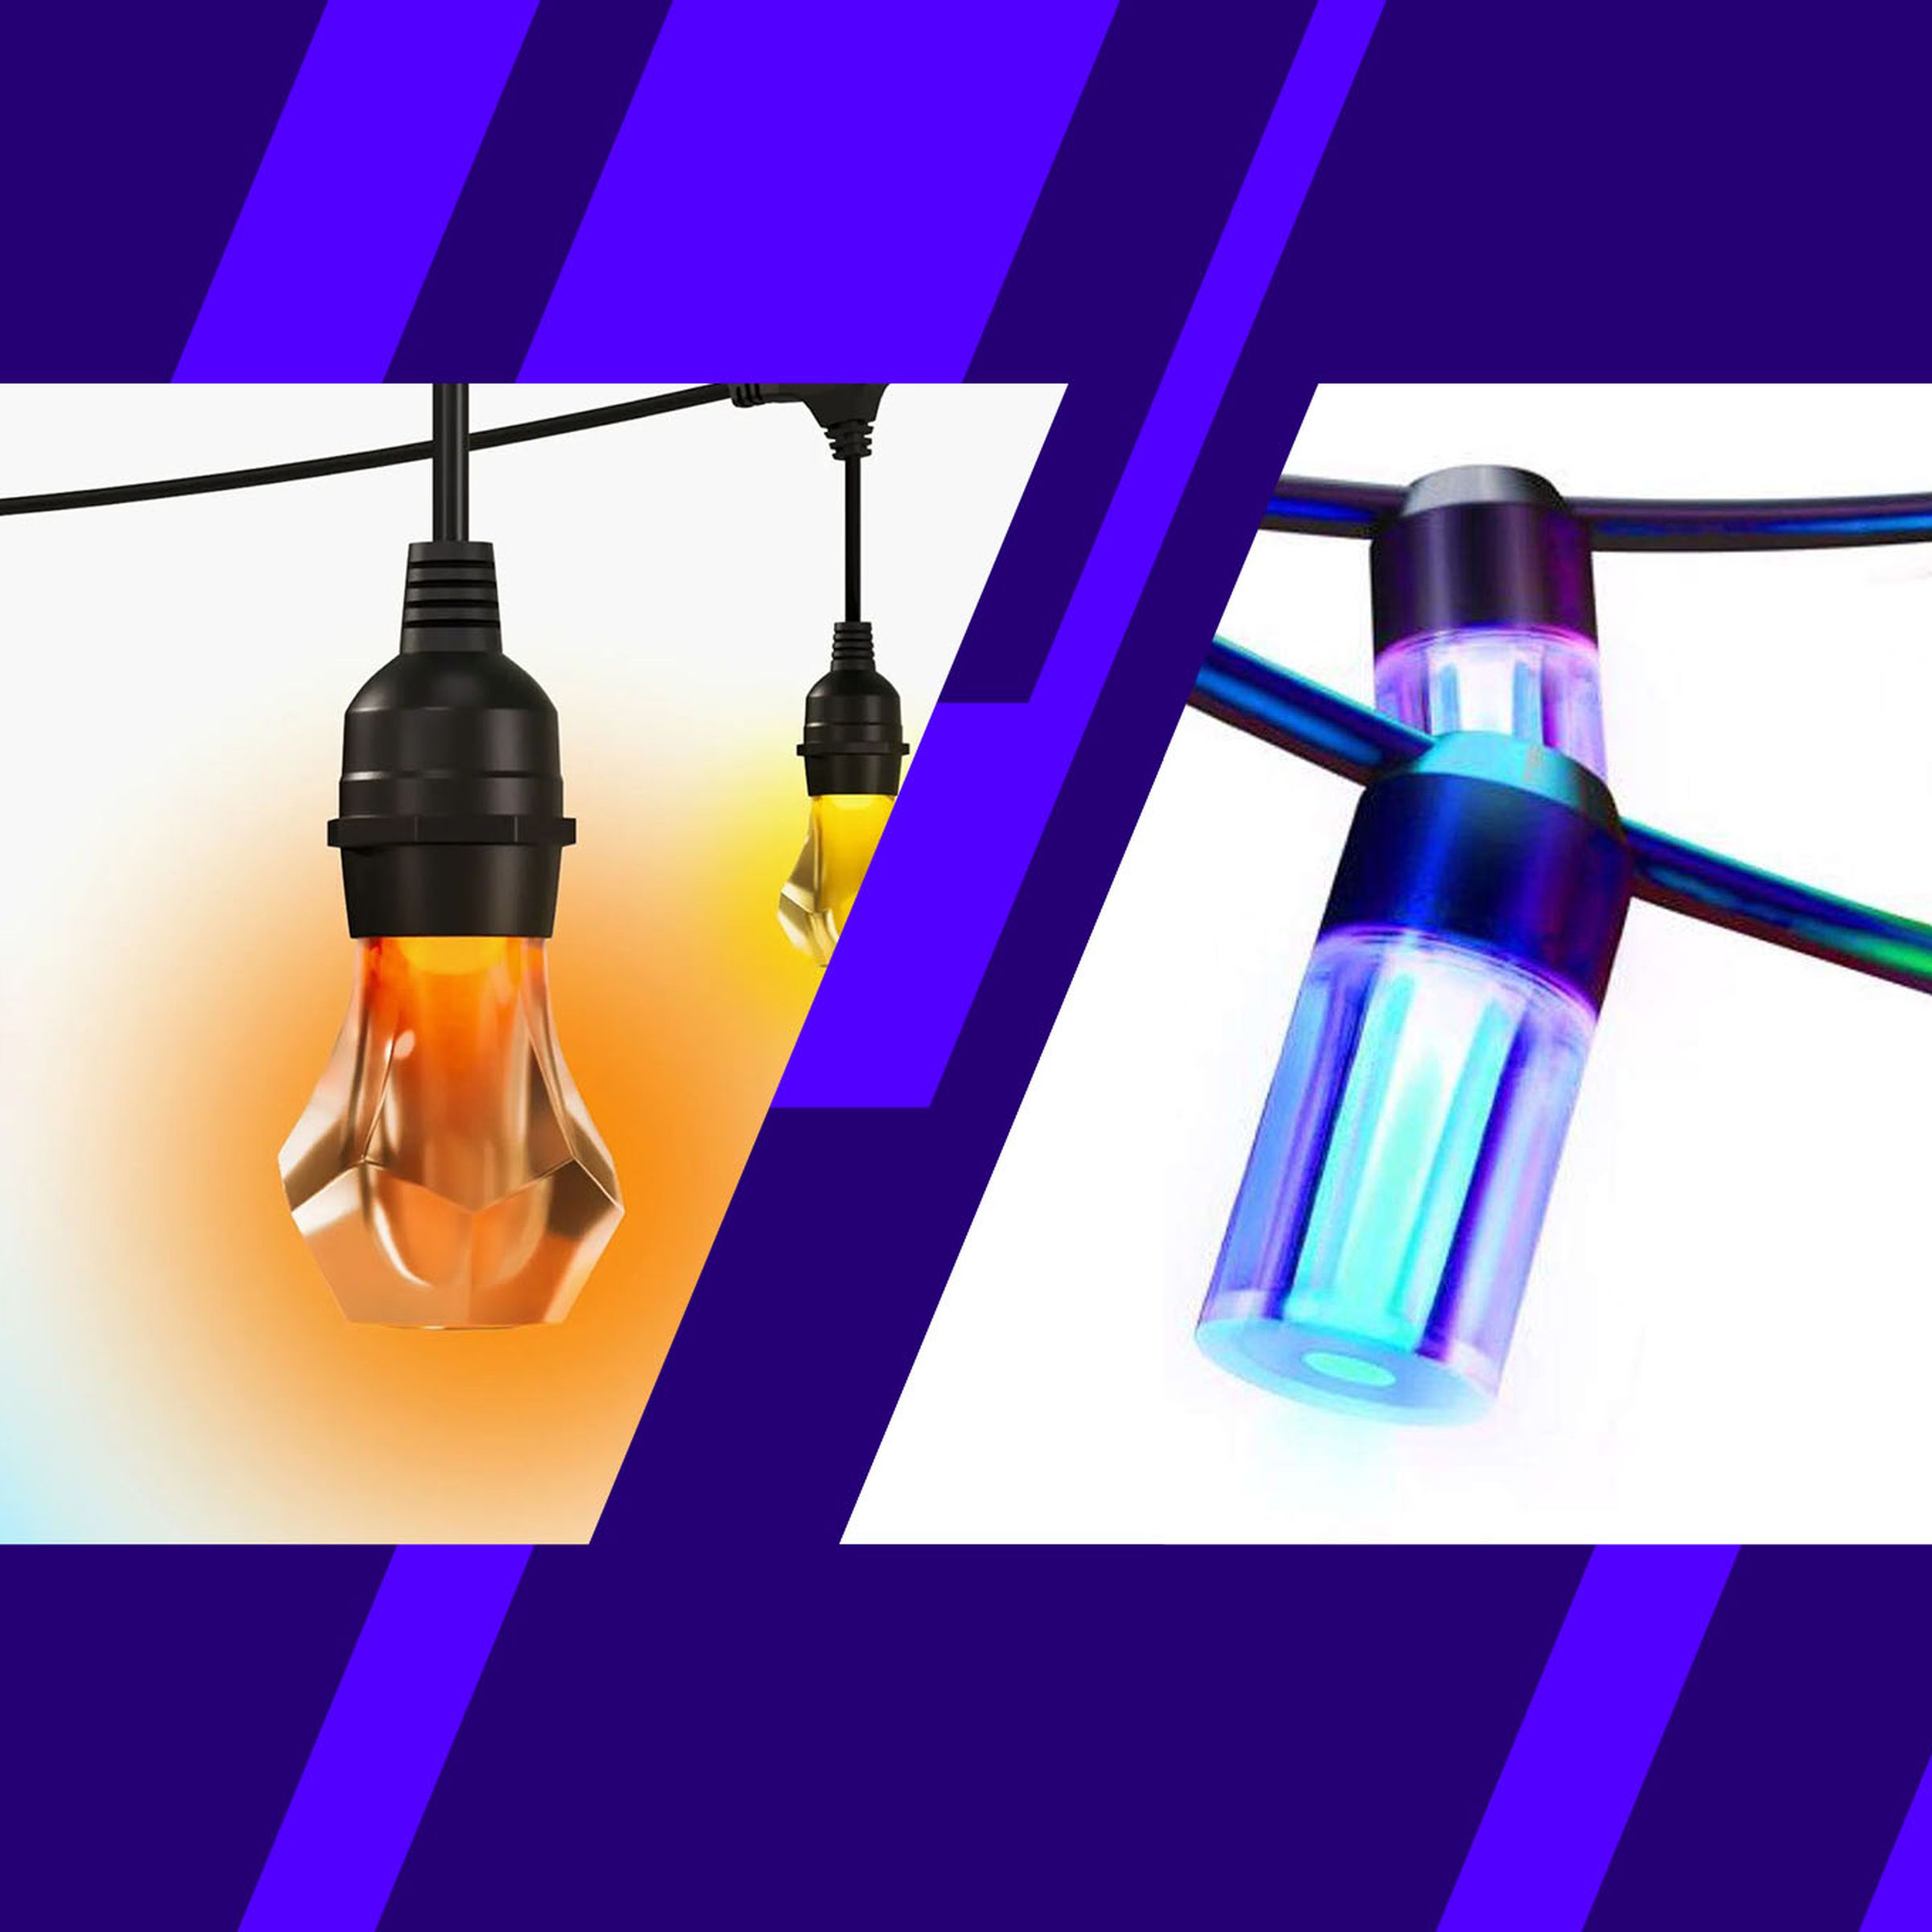 Photo collage showing two different brands of string lights.